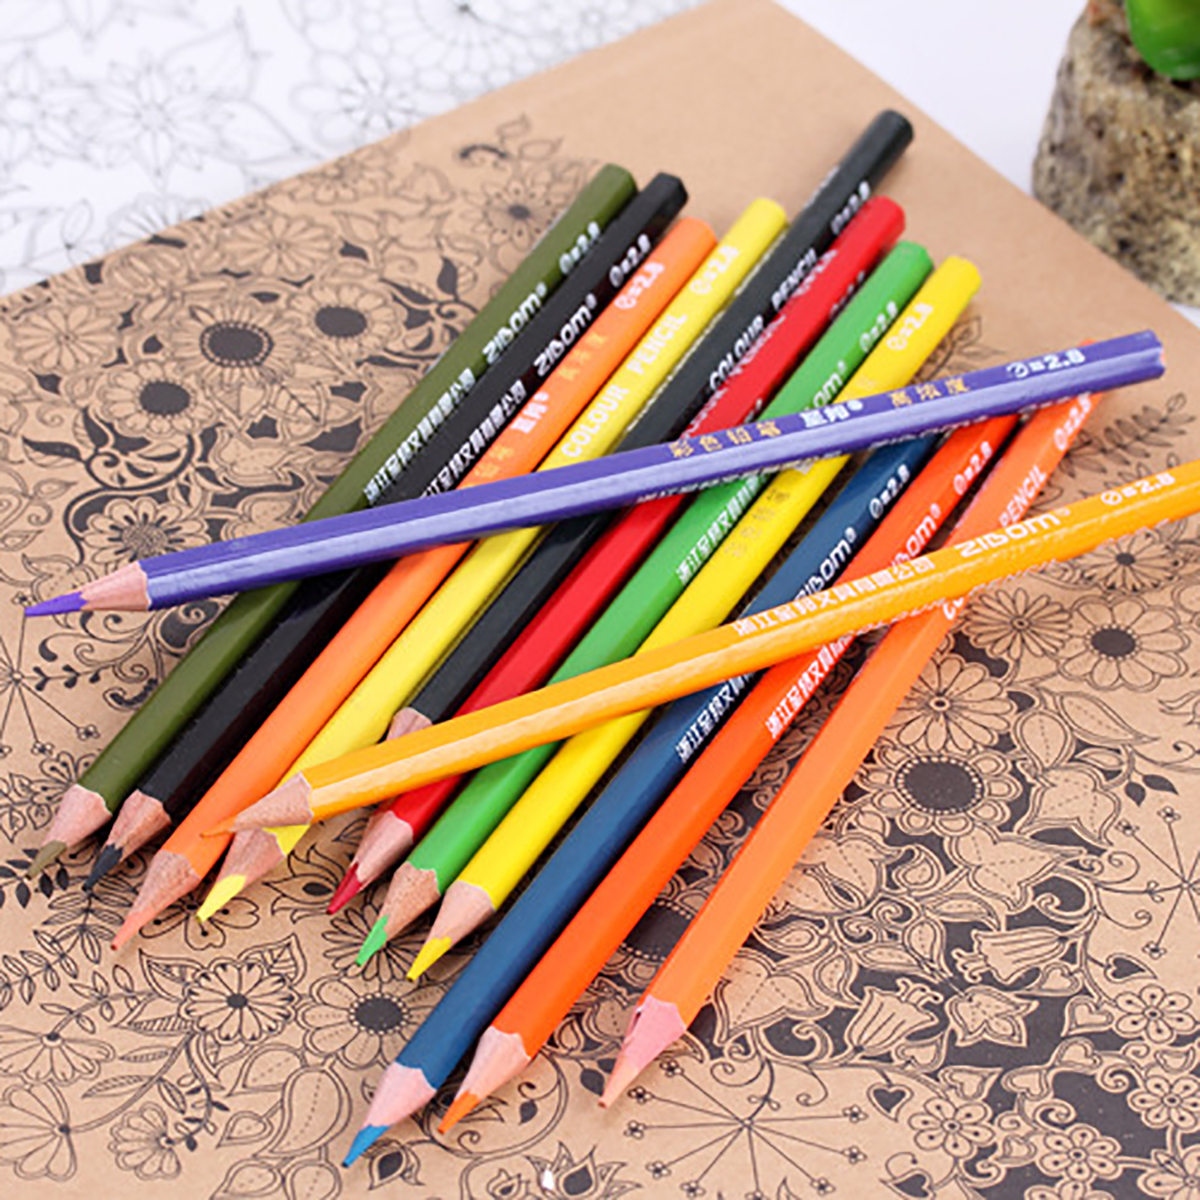 12-Colors-Wood-Color-Pencils-Set-Non-toxic-Artist-Painting-Oil-Pencil-for-School-Office-Drawing-Sket-1742753-7